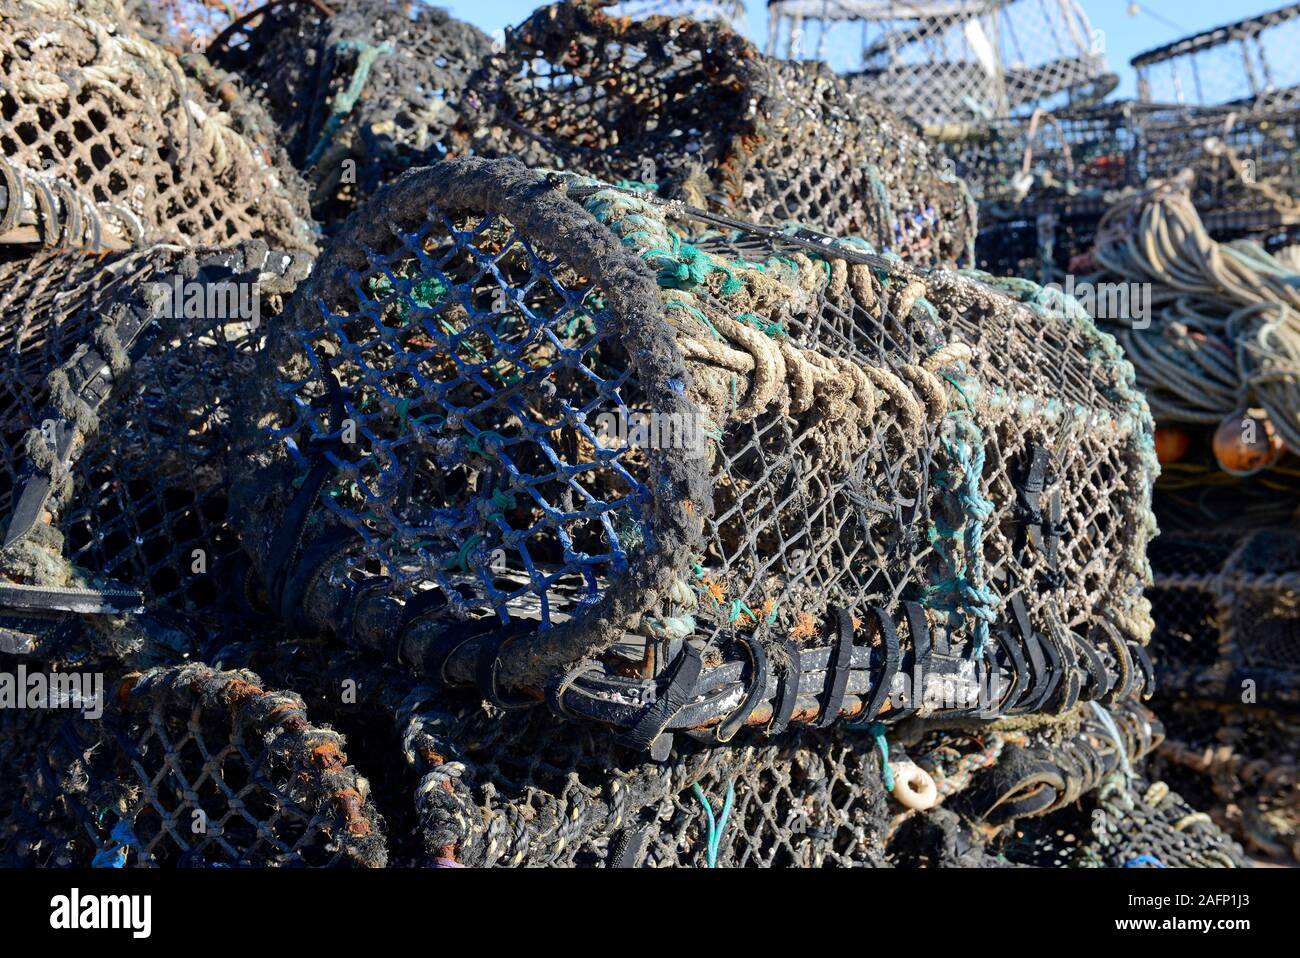 Large piles of creels or pots used by inshore fishers to catch crabs and lobster on the quayside at Paignton, Devon, UK. Stock Photo